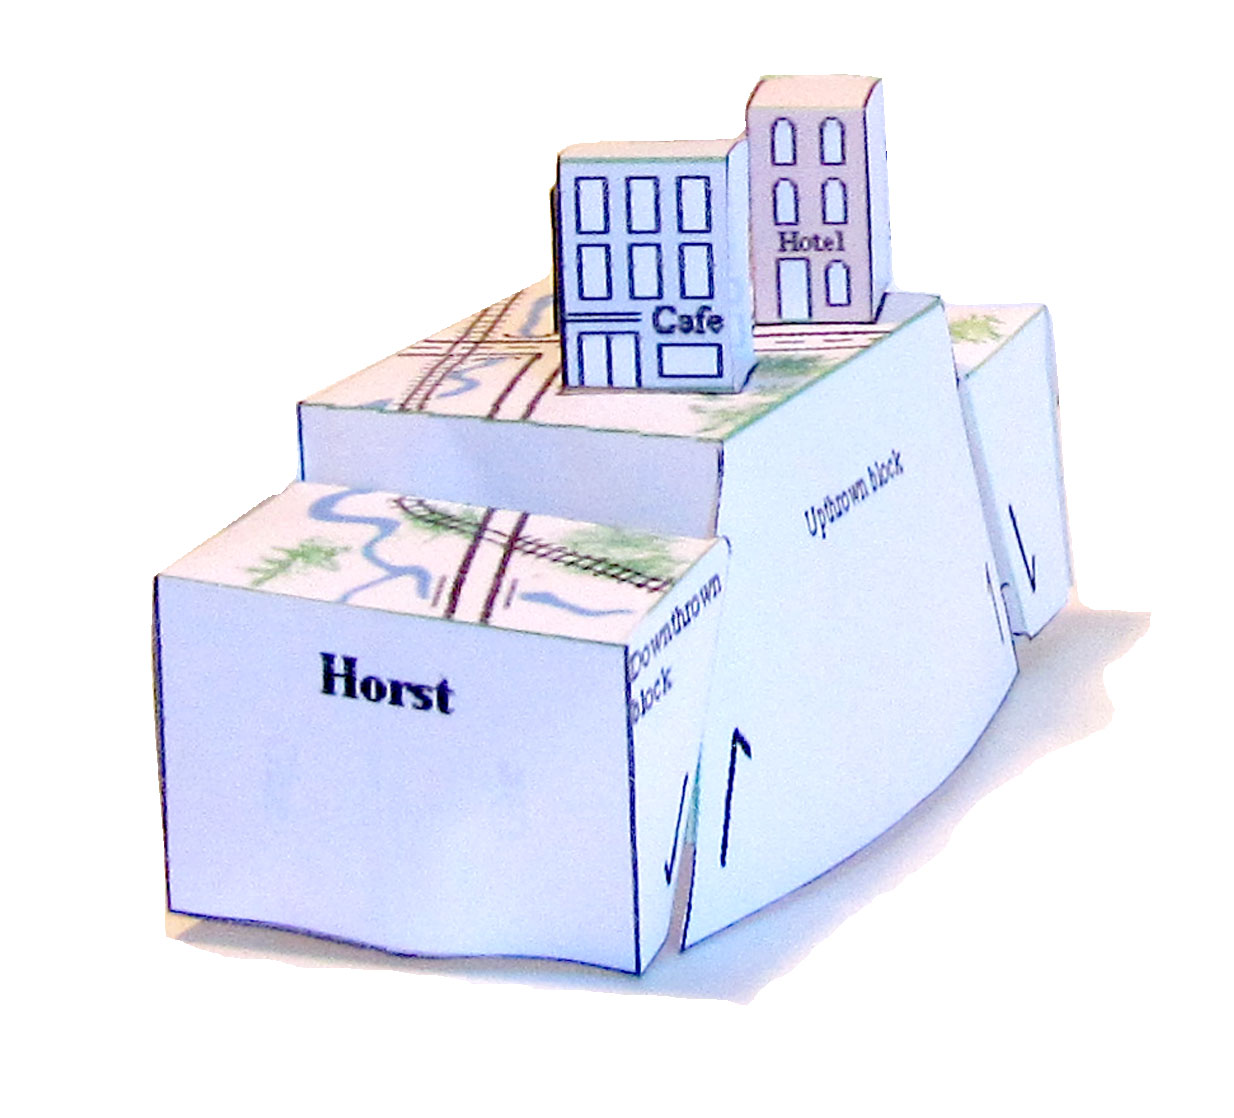 picture of horst model